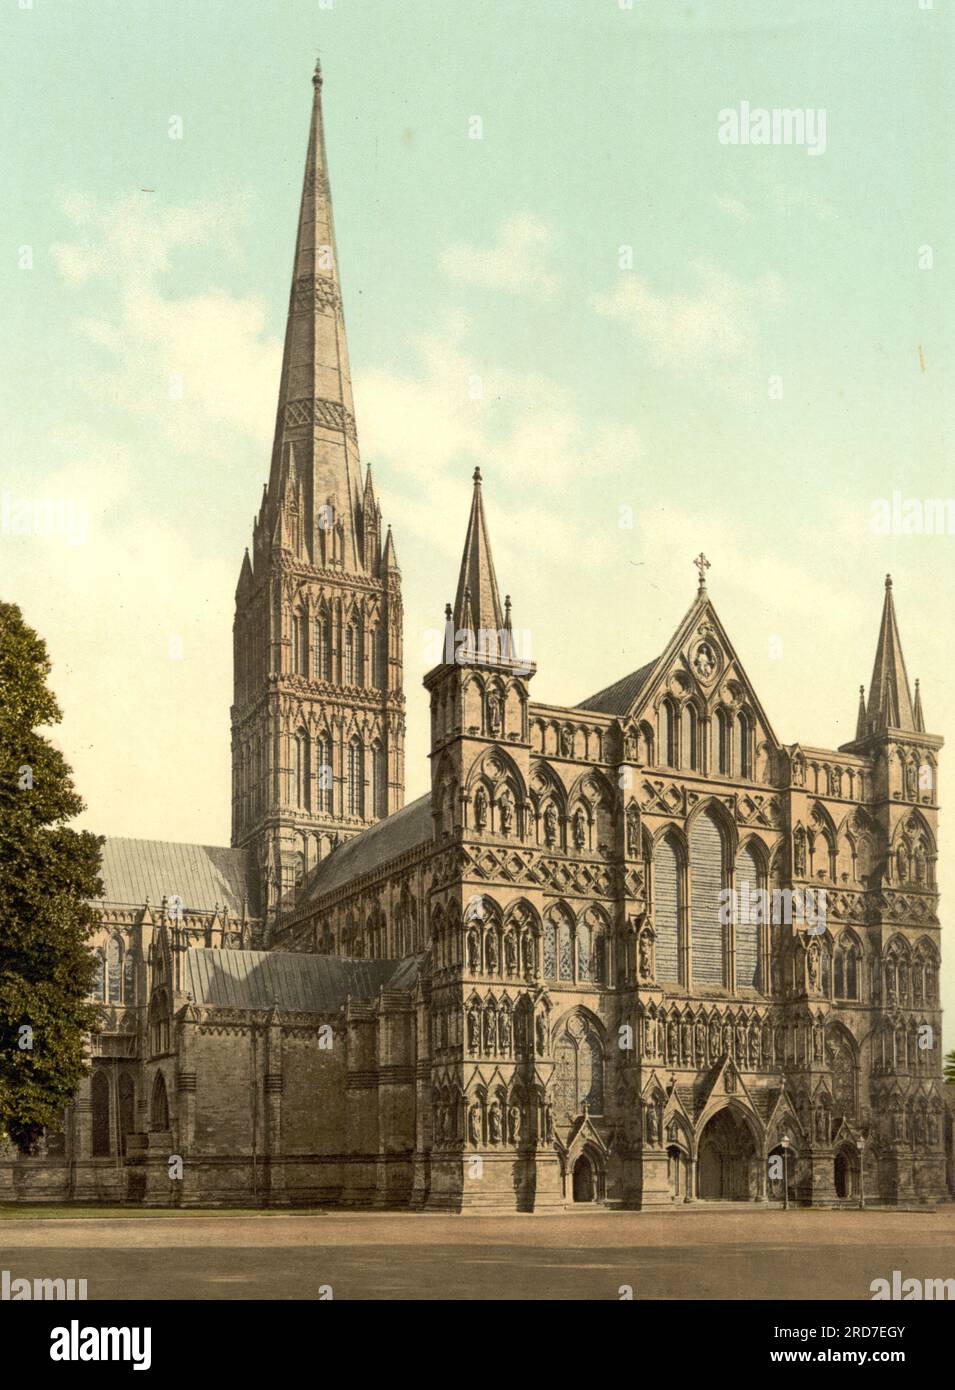 Salisbury Cathedral, formally the Cathedral Church of the Blessed Virgin Mary, is an Anglican cathedral in Salisbury, England, 1895, Historical, digital improved reproduction of an old Photochrome print Stock Photo